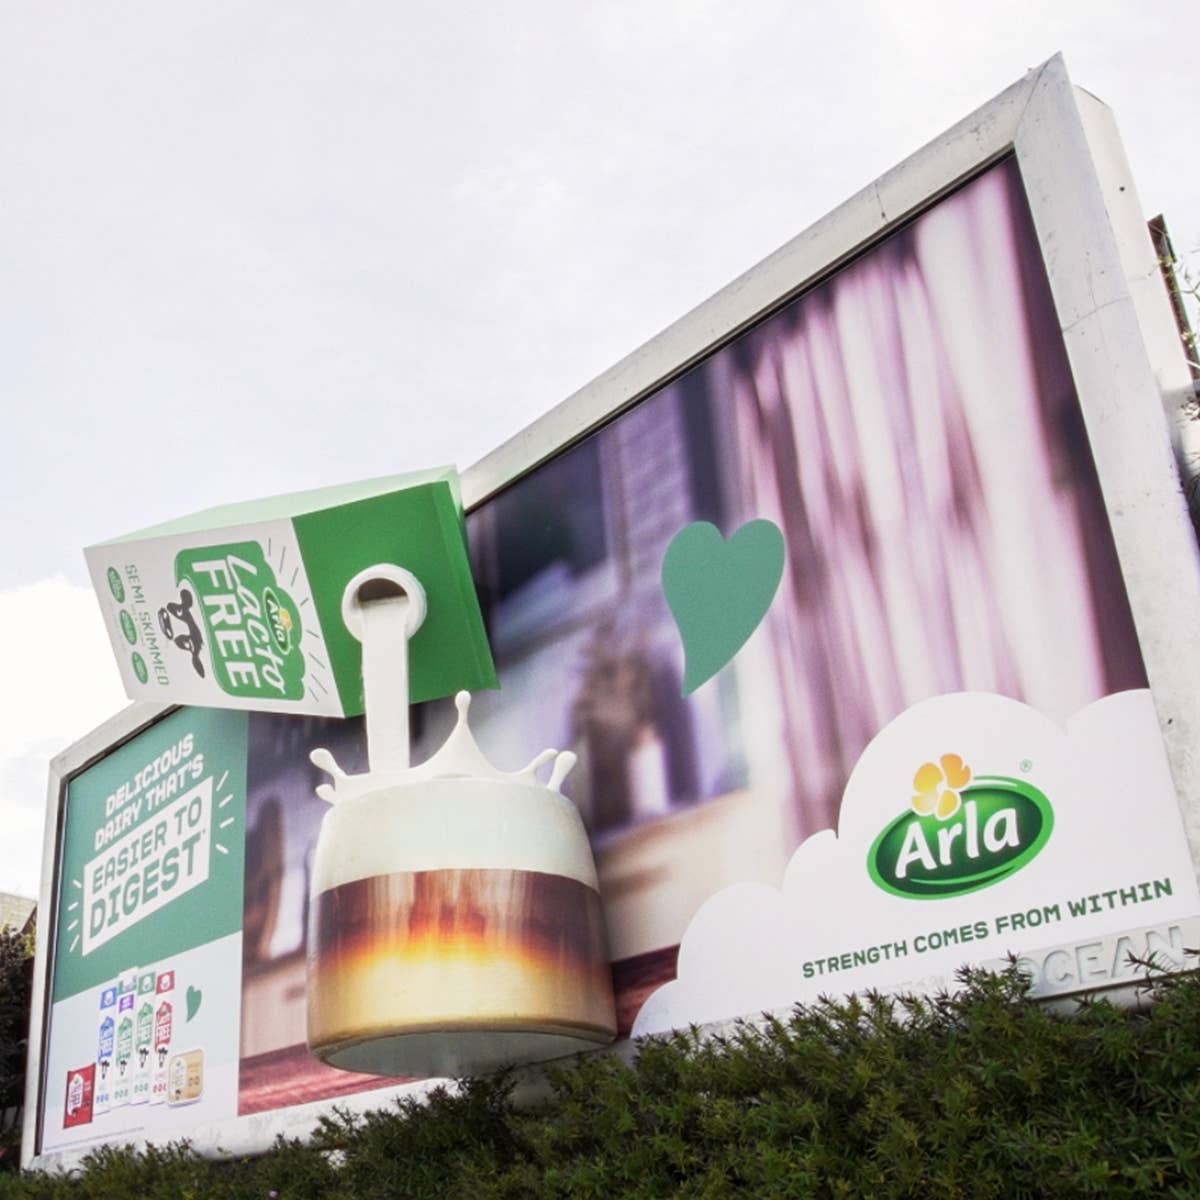 How Arla's Innovative Ad Made Milk the Talk of the Town